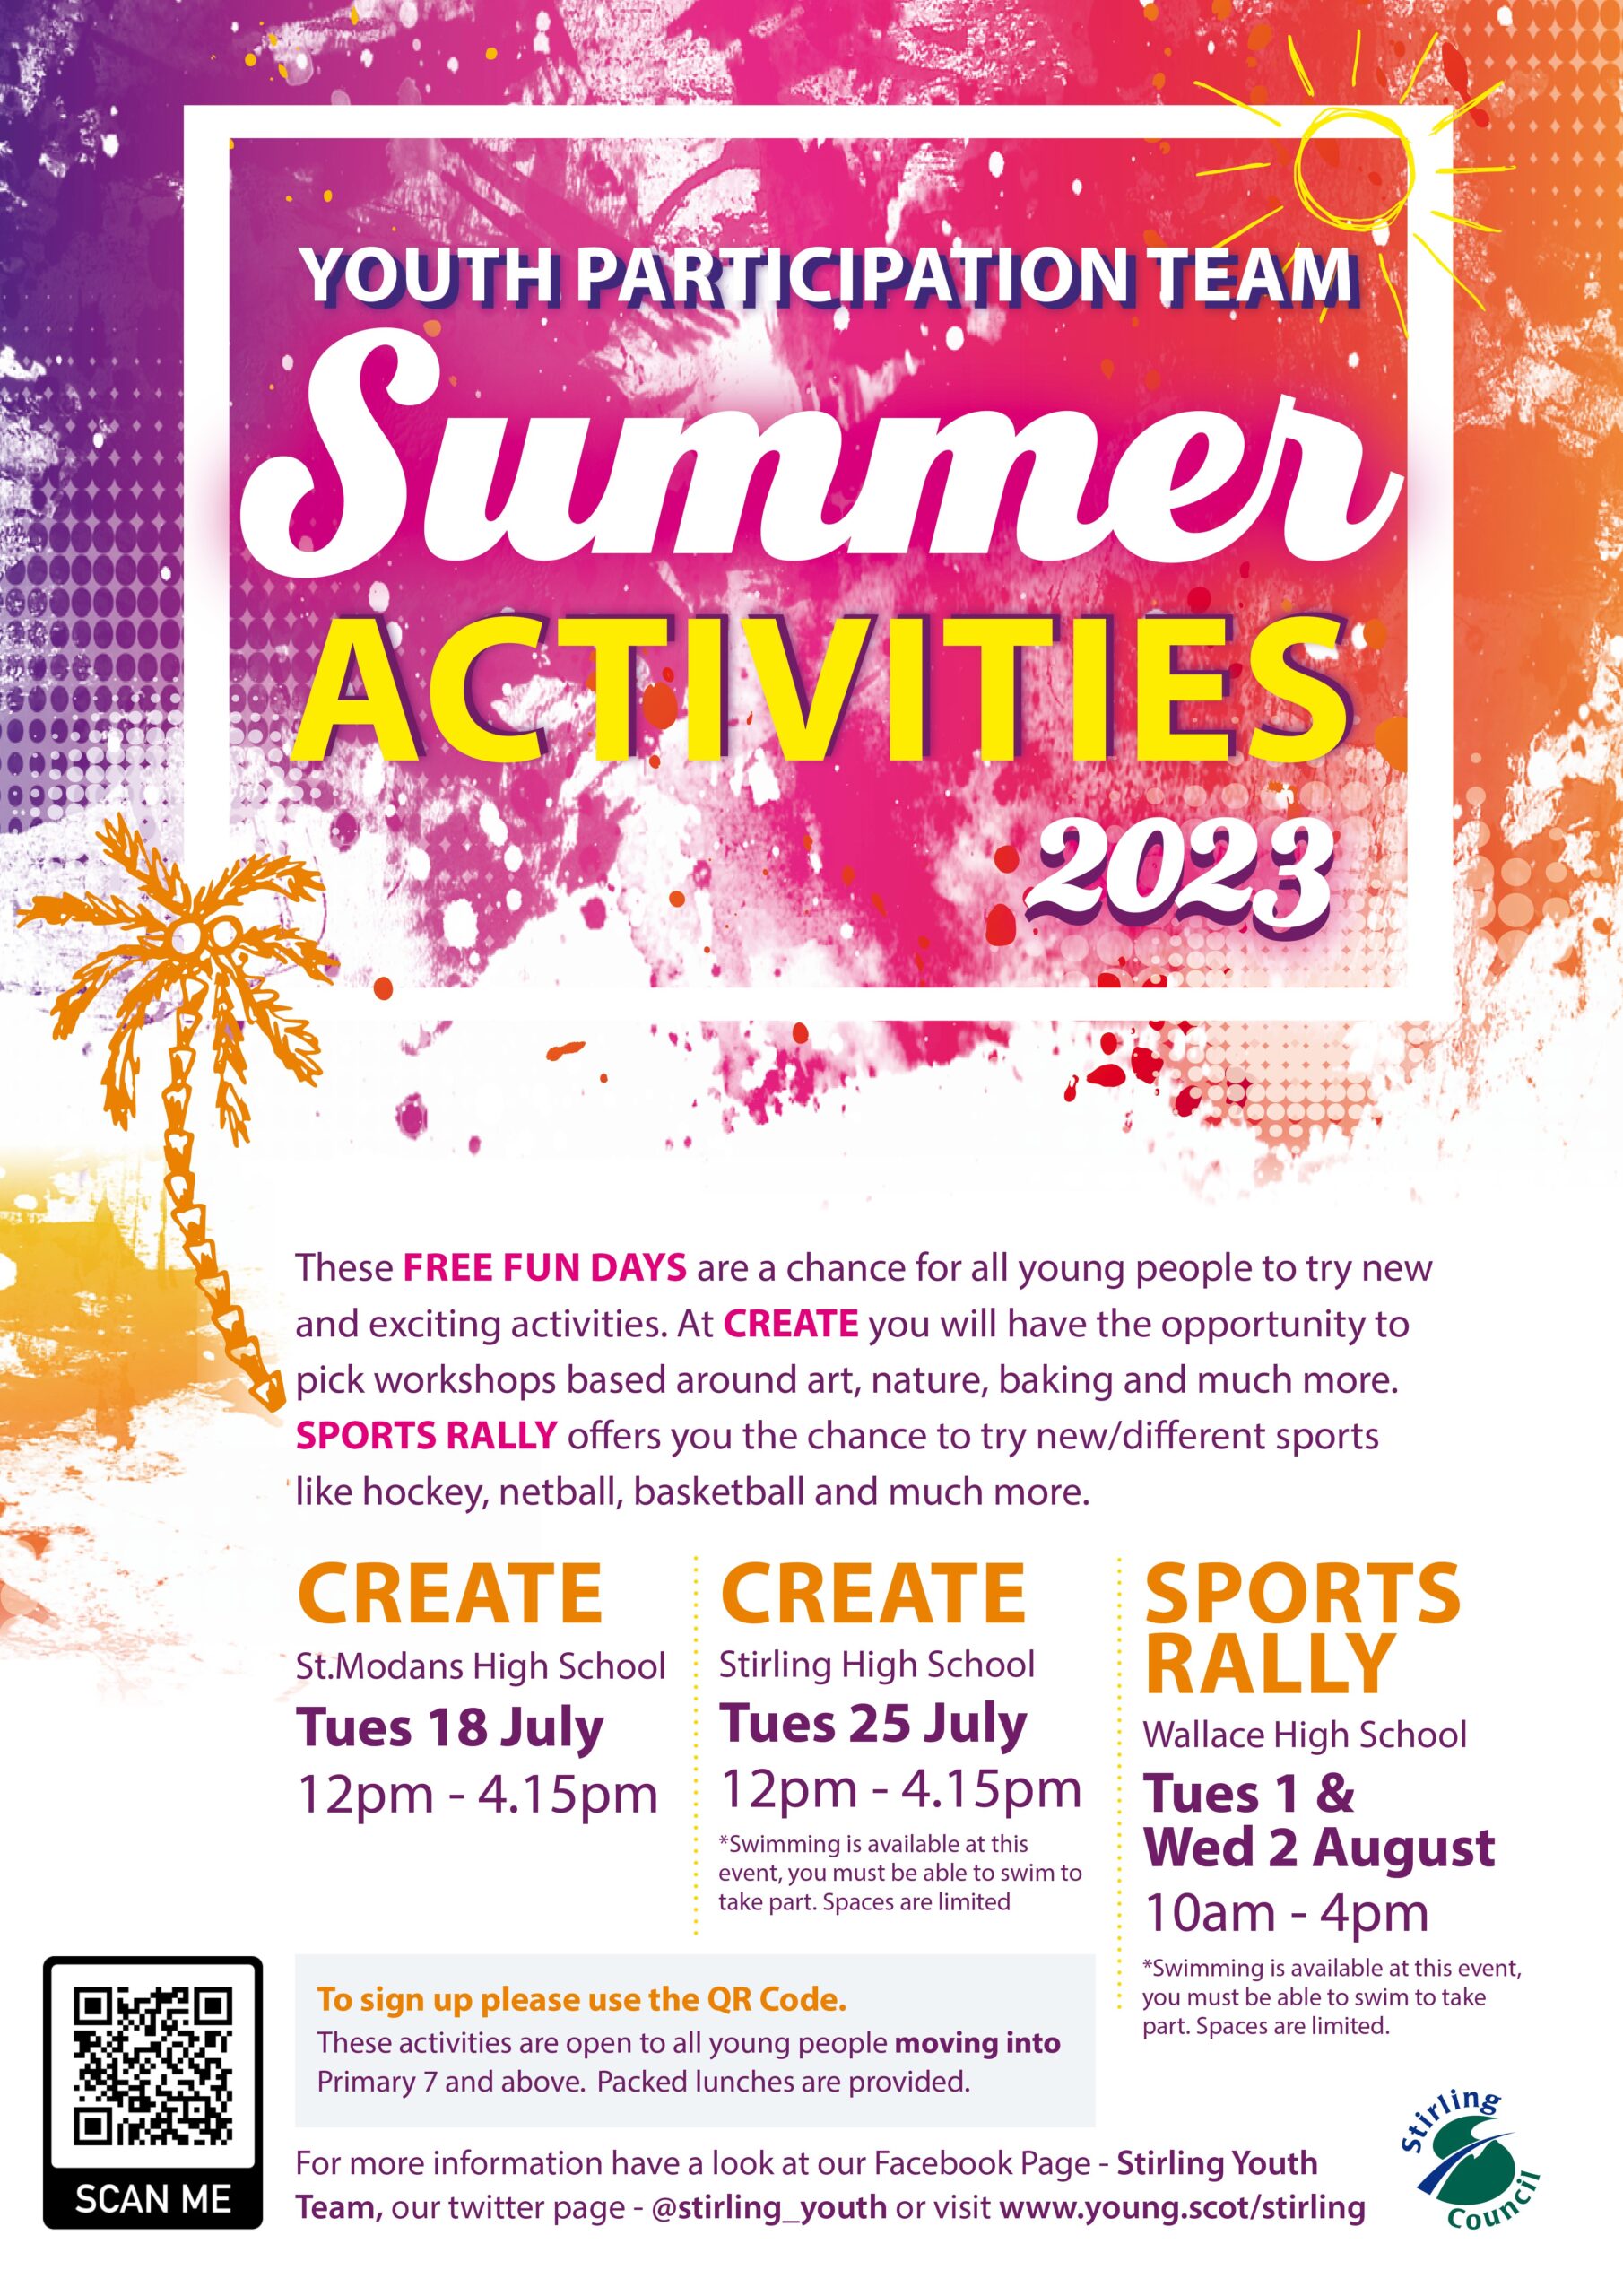 Free fun days for young people in Stirling during Summer 2023